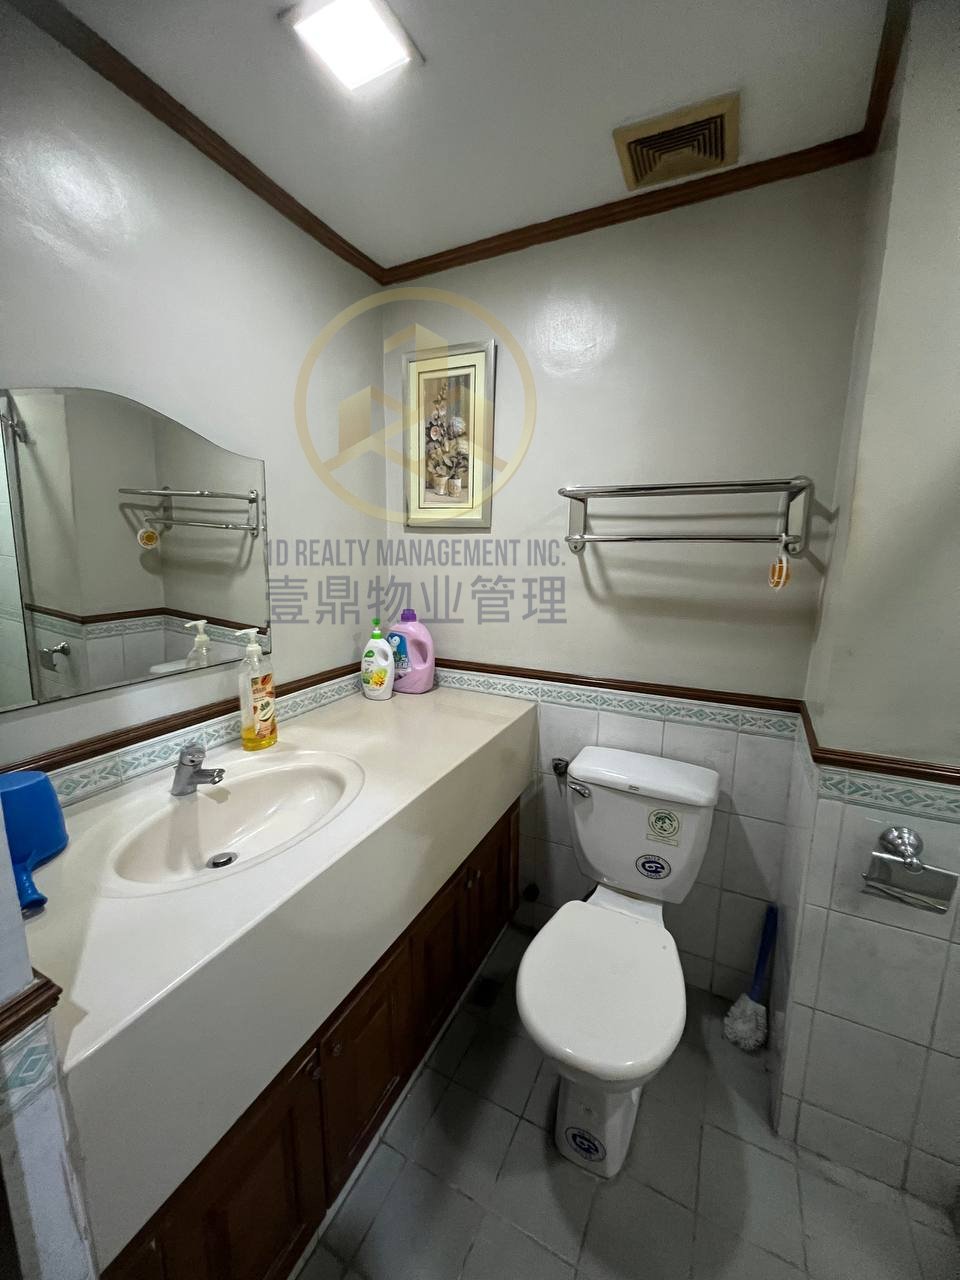 Paseo Parkview Suites - Salcedo Village, 142 Valero, Makati City - FOR LEASE